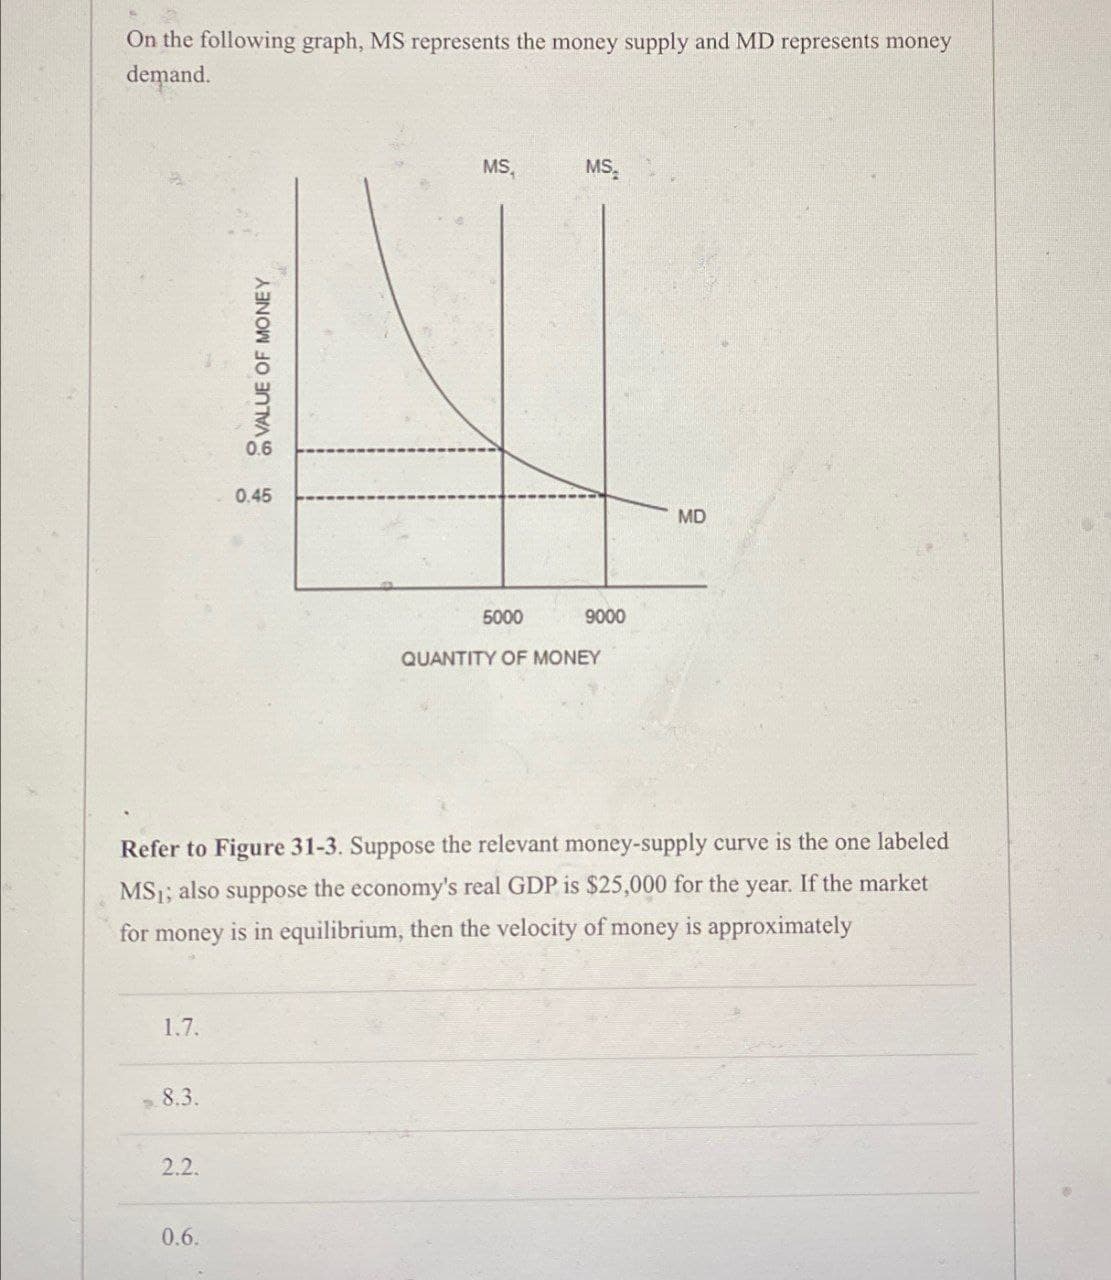 On the following graph, MS represents the money supply and MD represents money
demand.
VALUE OF MONEY
0.45
5000
MS
MS
9000
QUANTITY OF MONEY
MD
Refer to Figure 31-3. Suppose the relevant money-supply curve is the one labeled
MS1; also suppose the economy's real GDP is $25,000 for the year. If the market
for money is in equilibrium, then the velocity of money is approximately
1.7.
8.3.
2.2.
0.6.